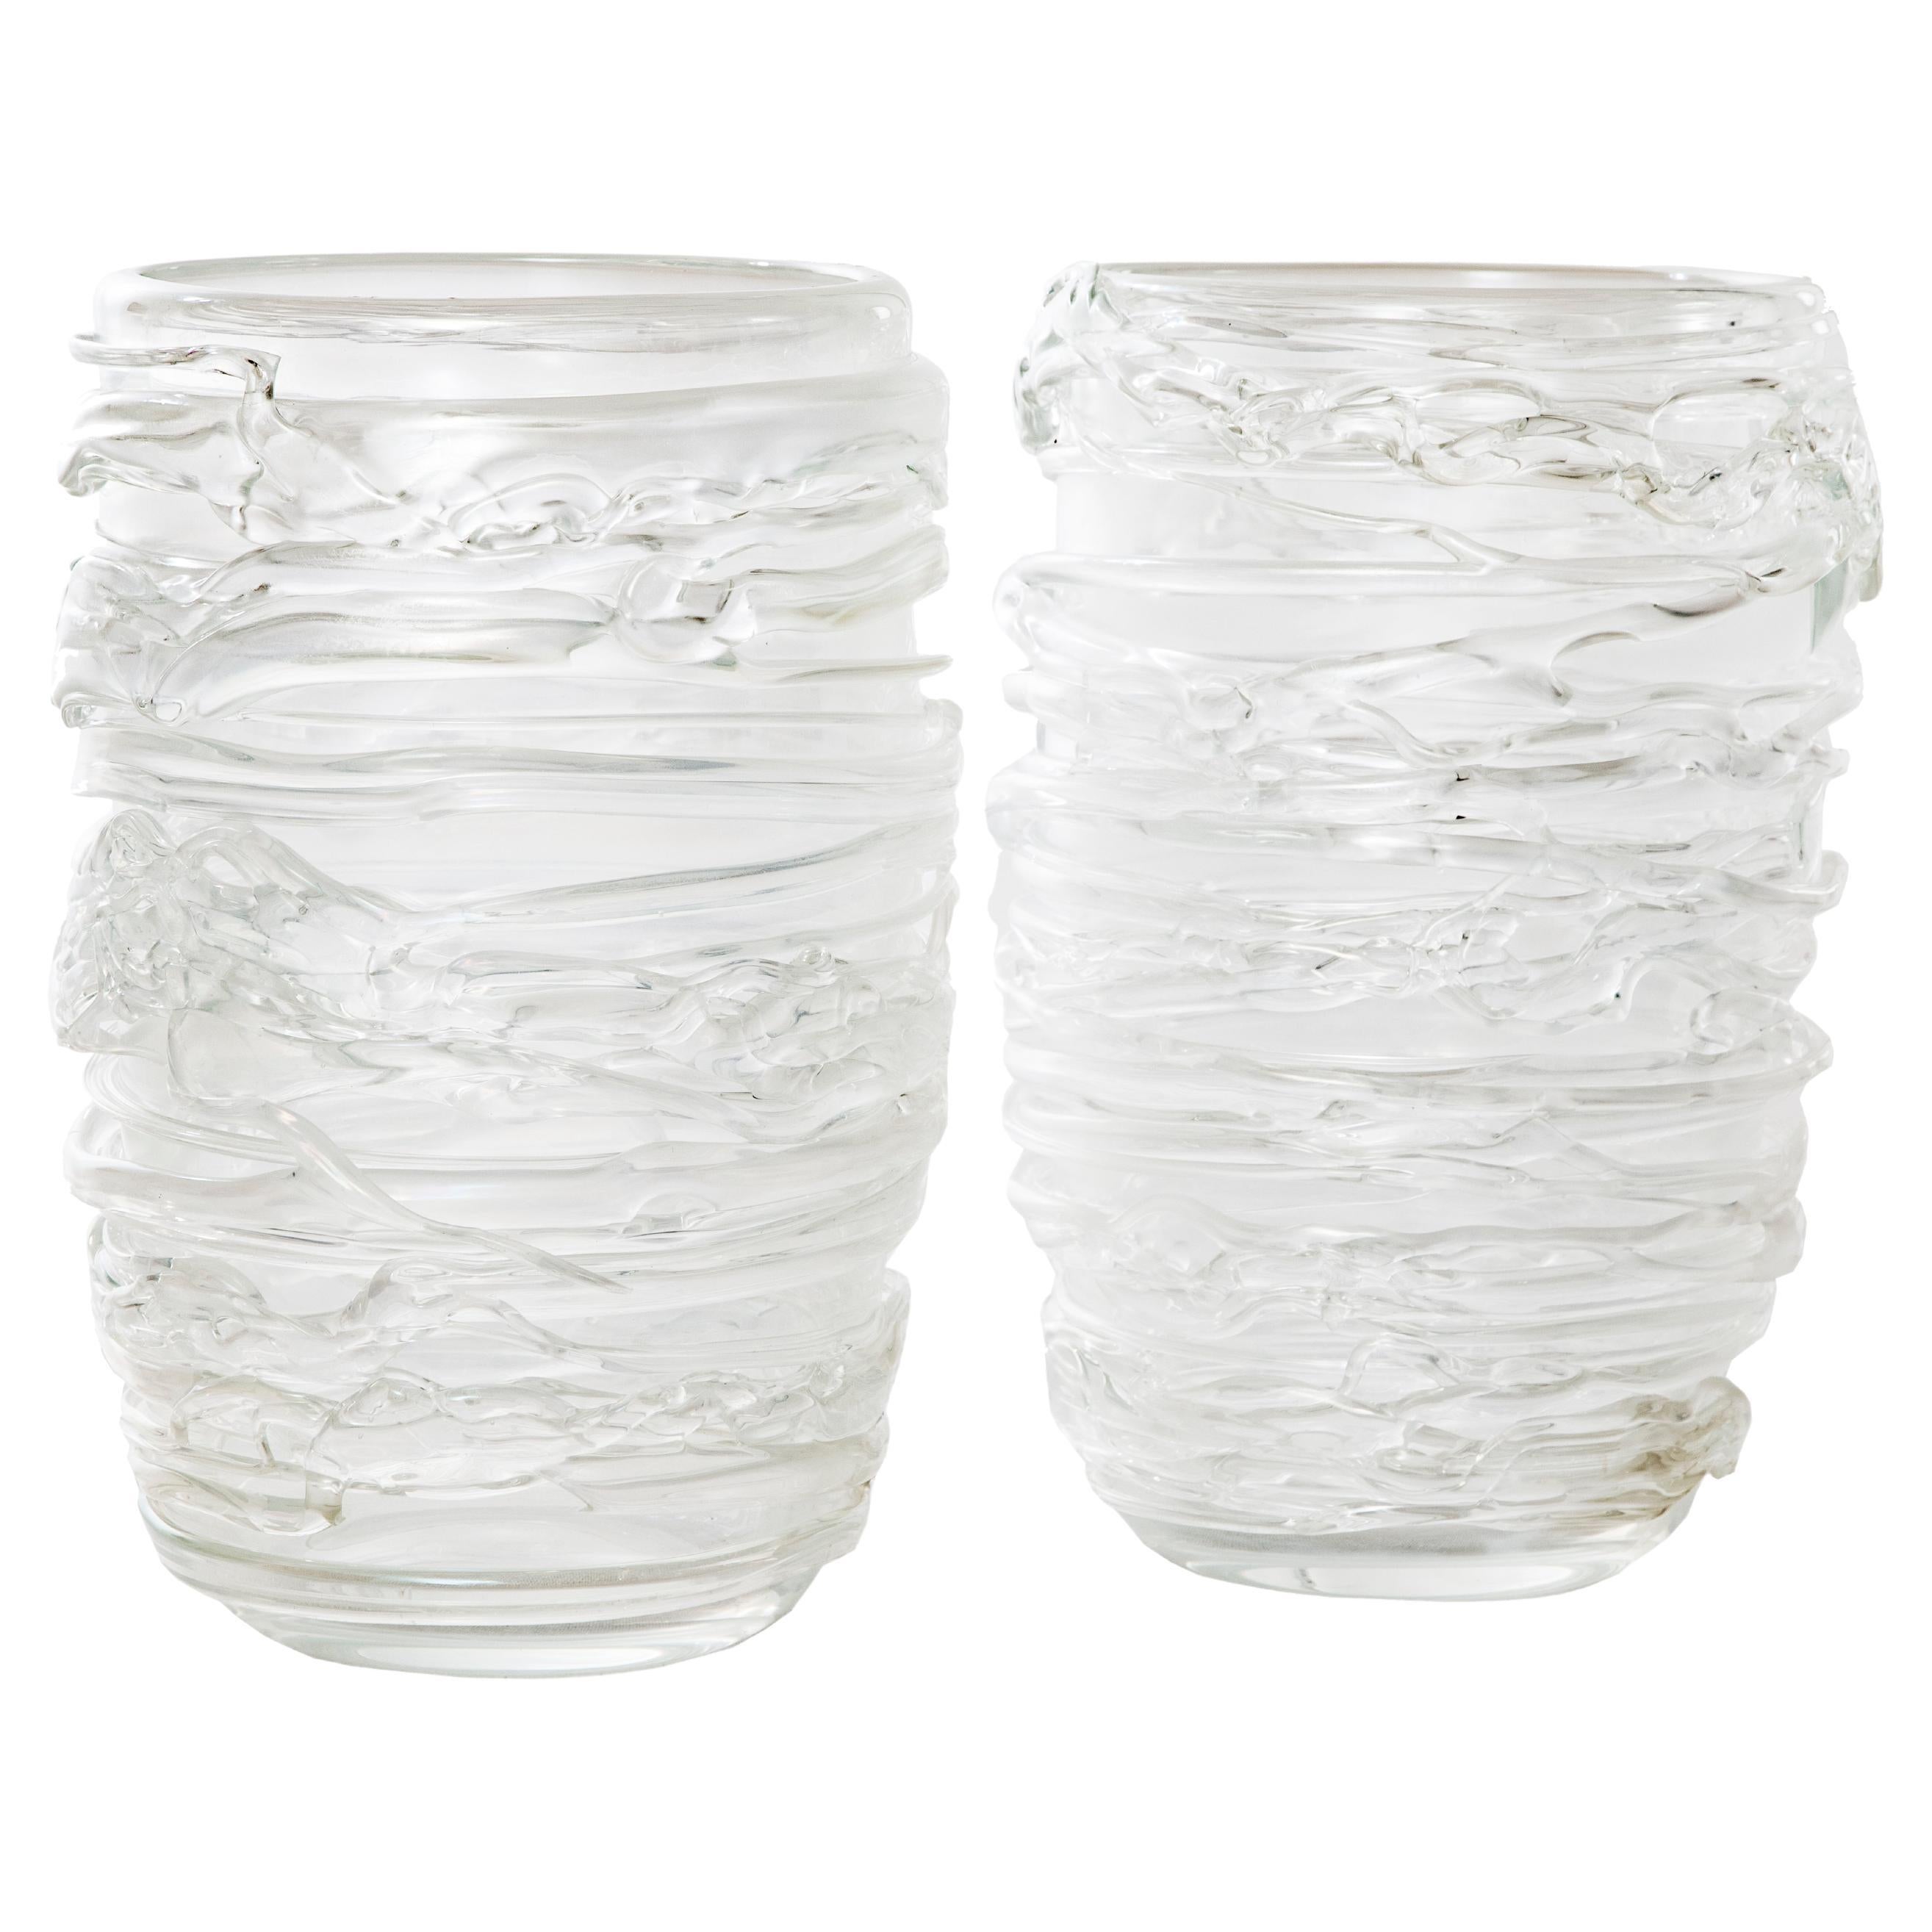 Pair of Large Clear Iridescent Textured Murano Glass Vases